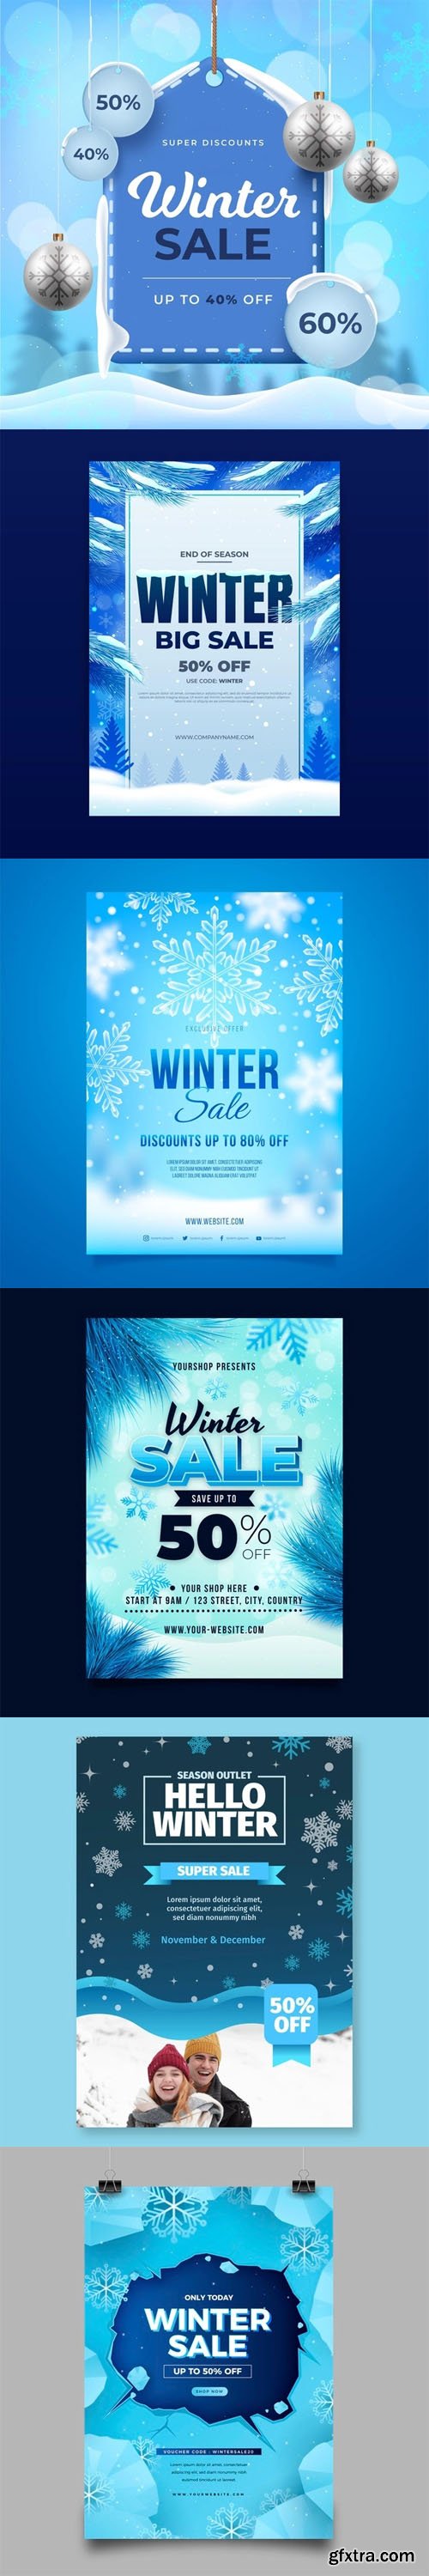 Realistic Winter Sales Posters Collection Vol.3 - 6 Vector Templates